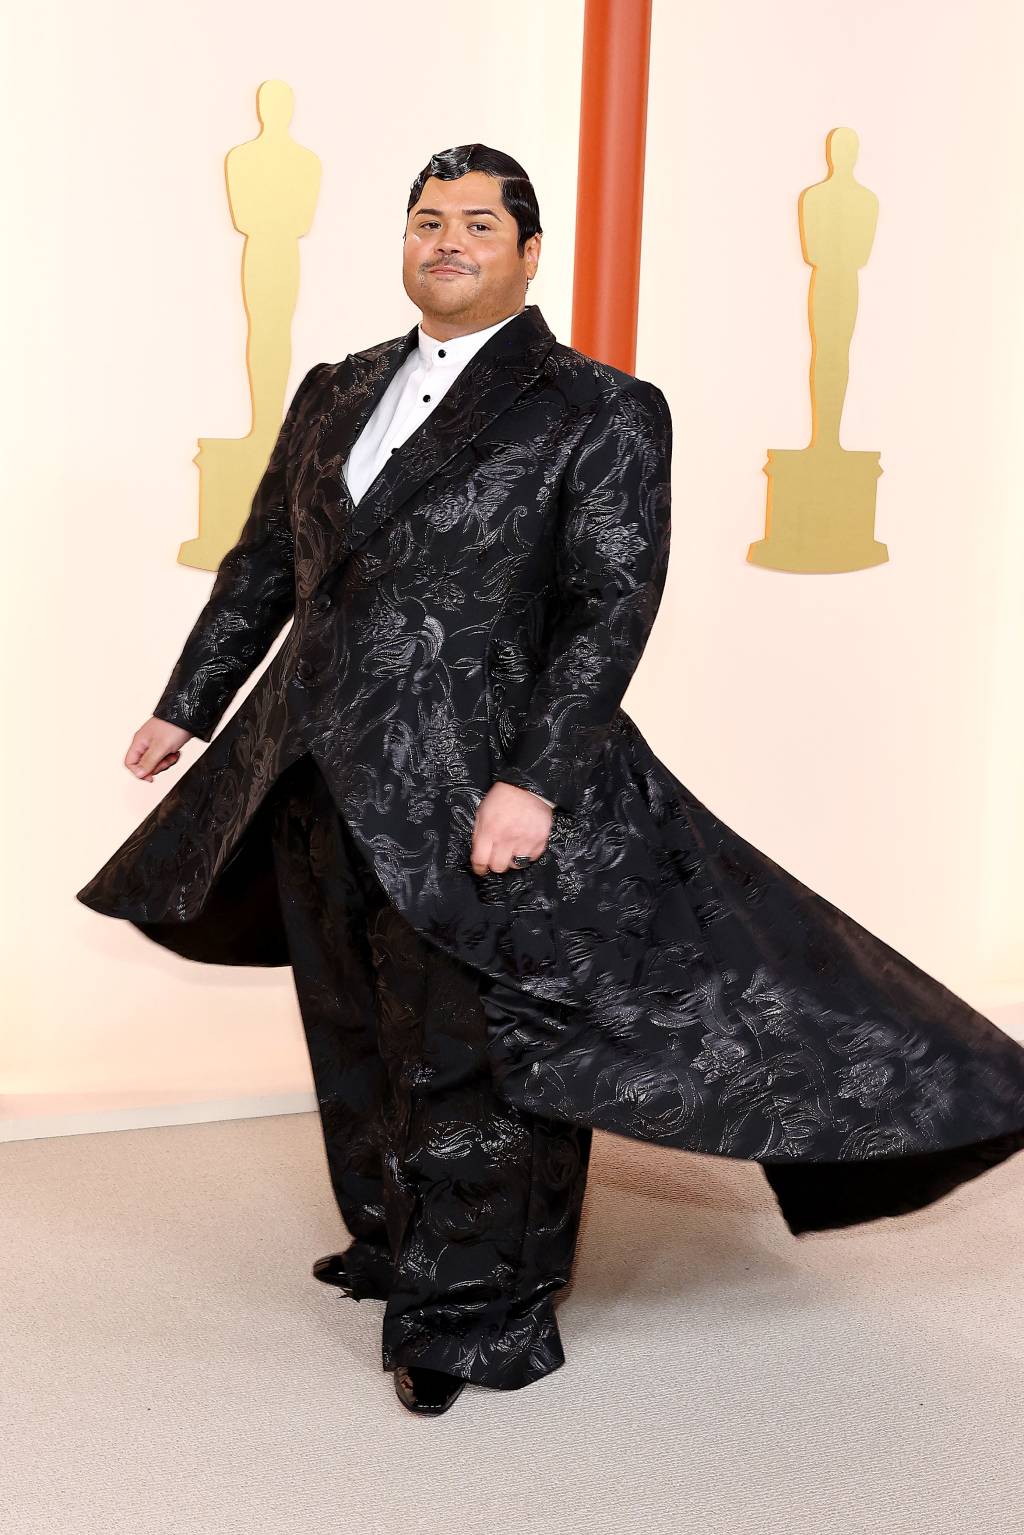 HOLLYWOOD, CALIFORNIA - MARCH 12: Harvey Guillen attends the 95th Annual Academy Awards on March 12, 2023 in Hollywood, California. Arturo Holmes/Getty Images /AFP (Photo by Arturo Holmes / GETTY IMAGES NORTH AMERICA / Getty Images via AFP)